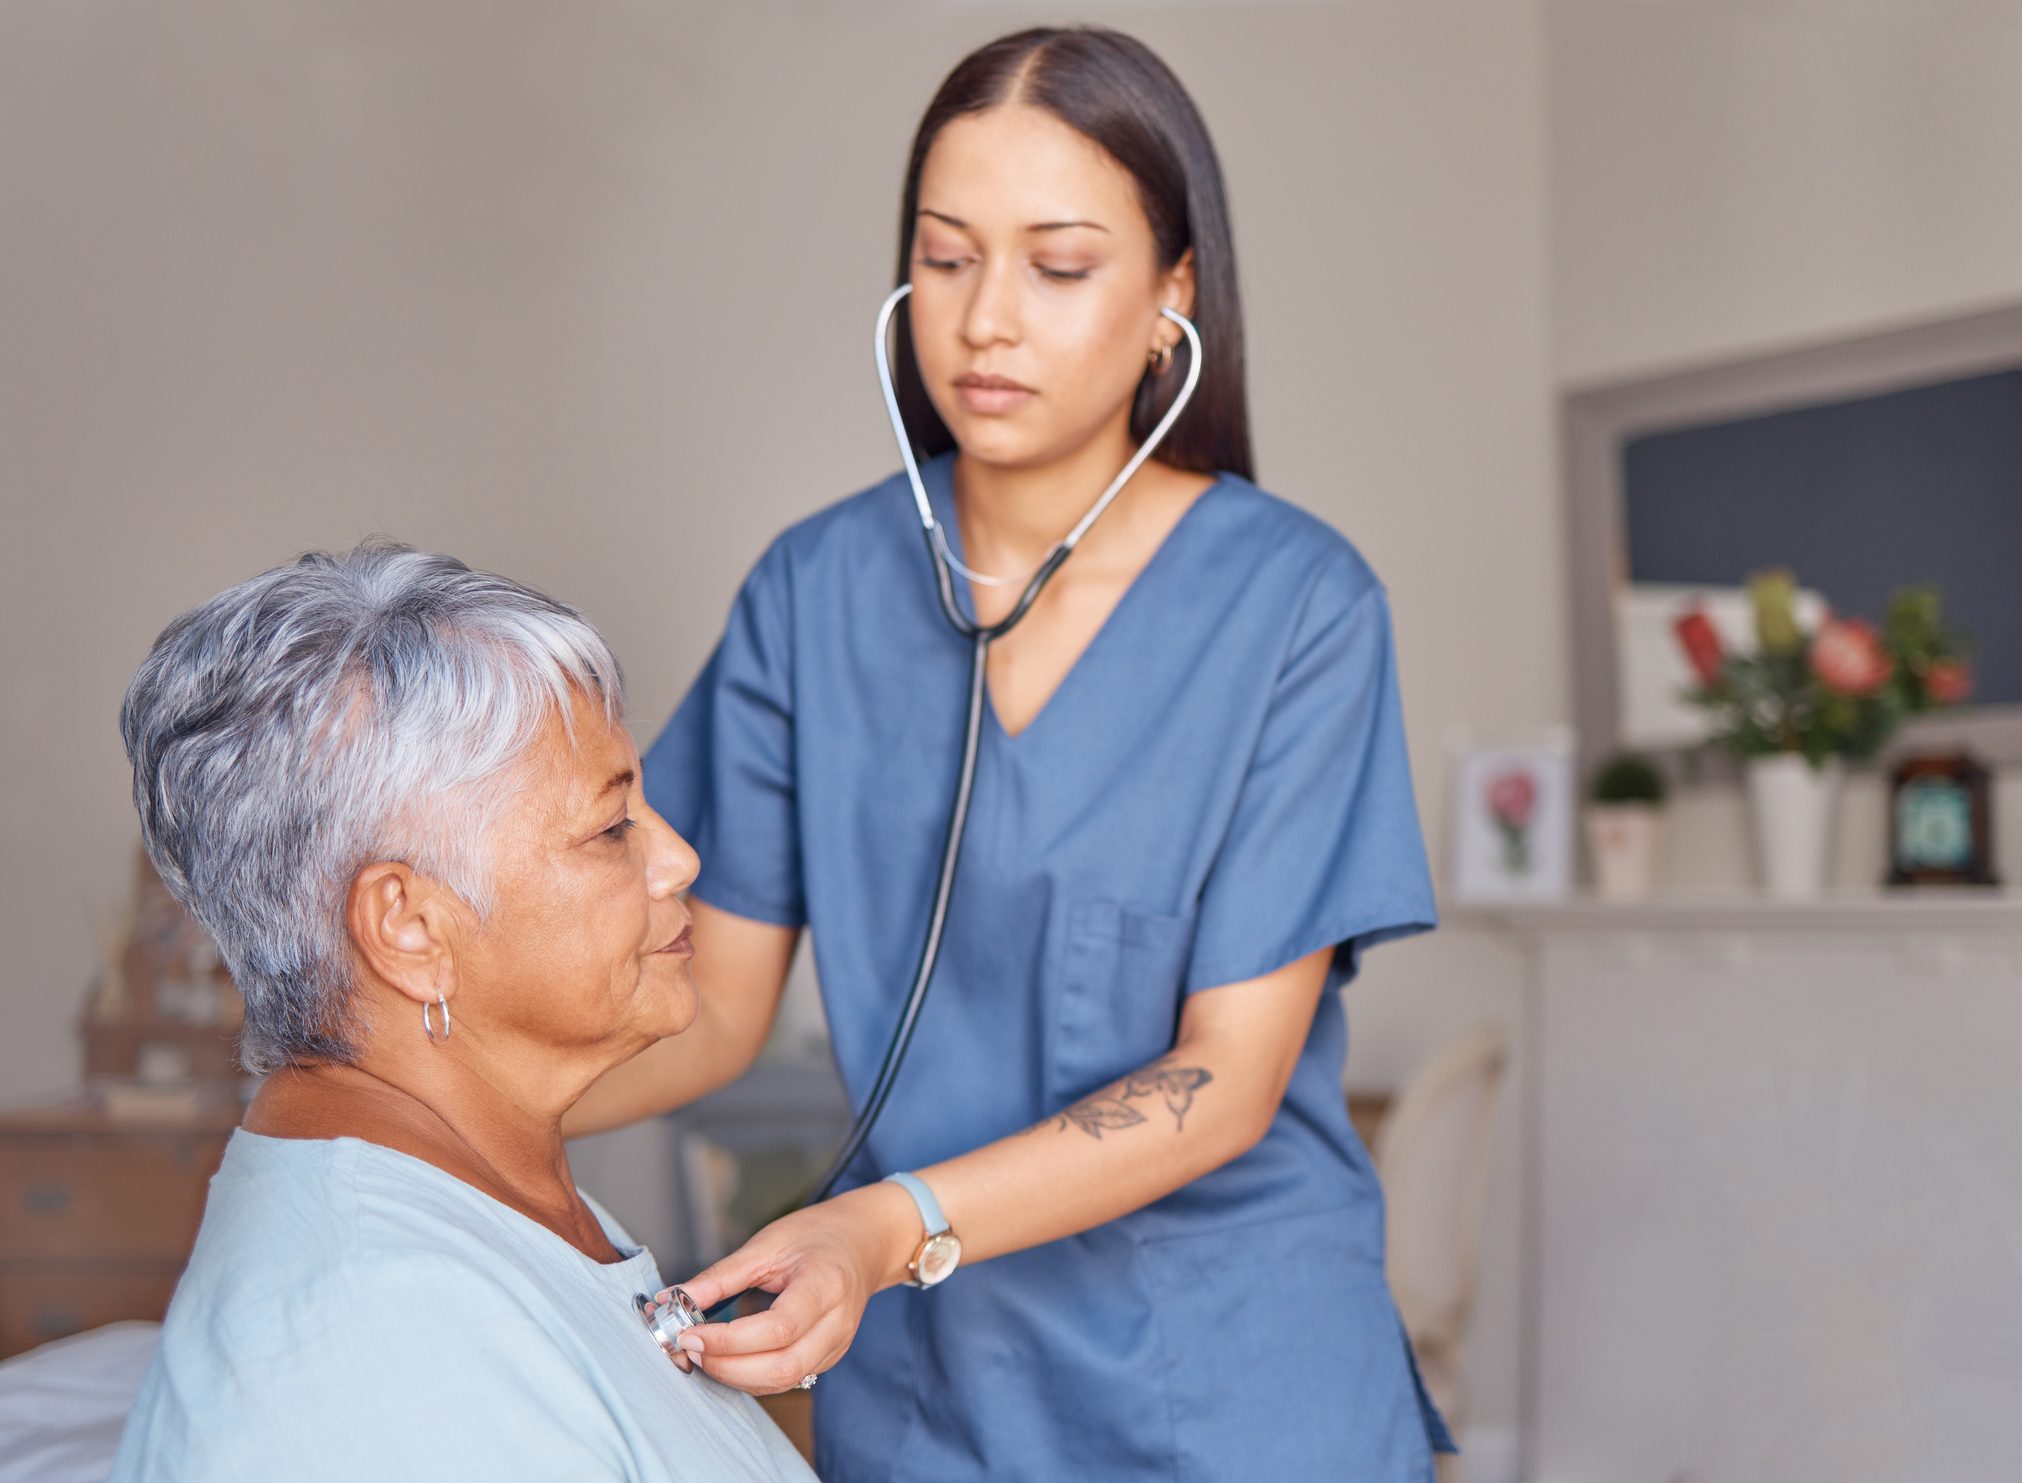 Nurse with a stethoscope listening to heartbeat of an elderly patient during a health consultation.